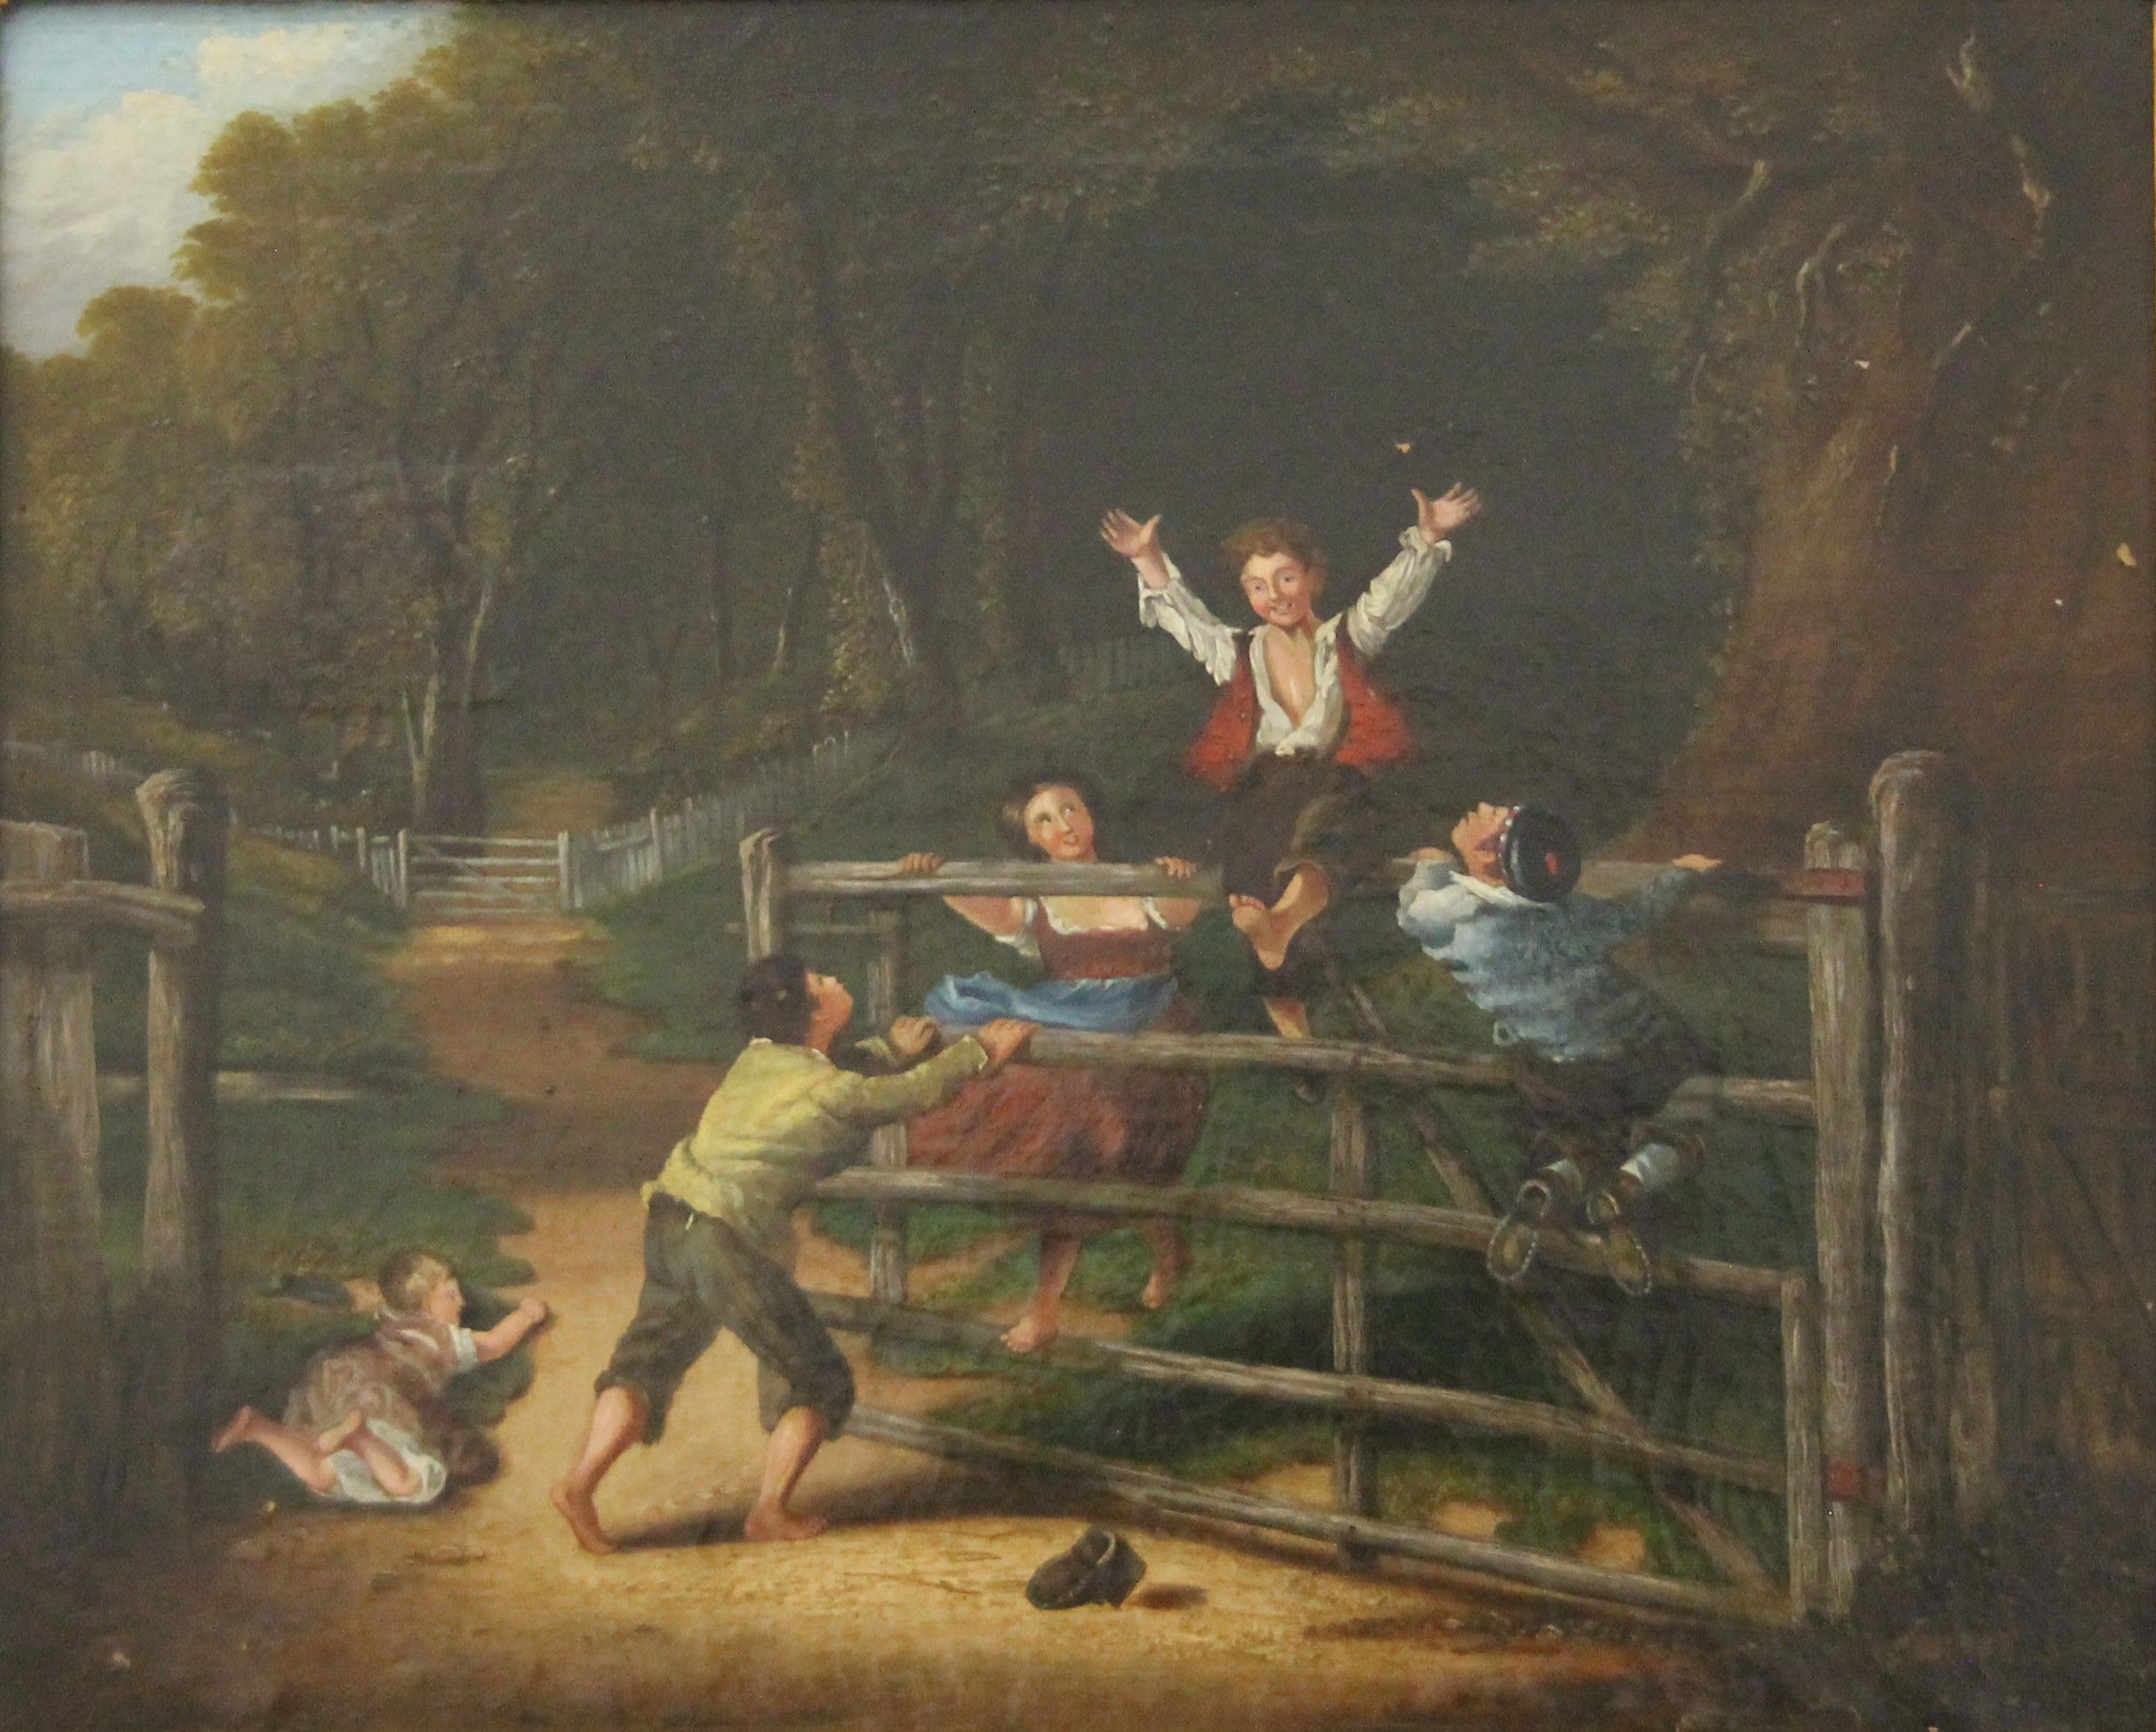 19th CENTURY SCHOOL, Children Playing on a Gate, oil on canvas, framed. 52 x 42 cm.